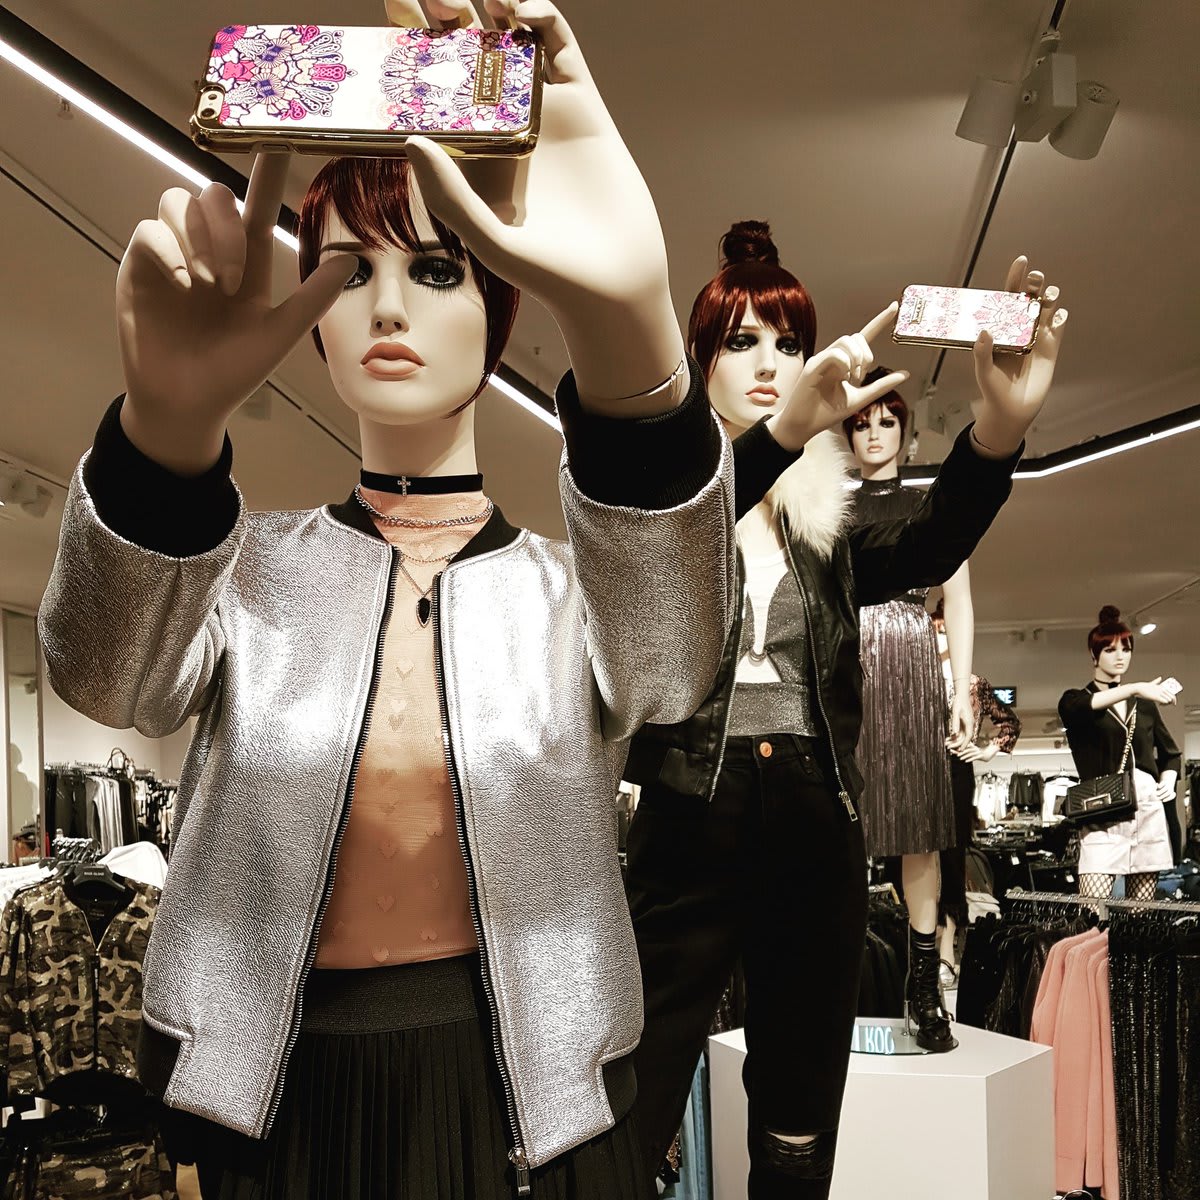 Emo and Selfie-Taking Mannequins Are a Real Thing Now ... - 1200 x 1200 jpeg 299kB